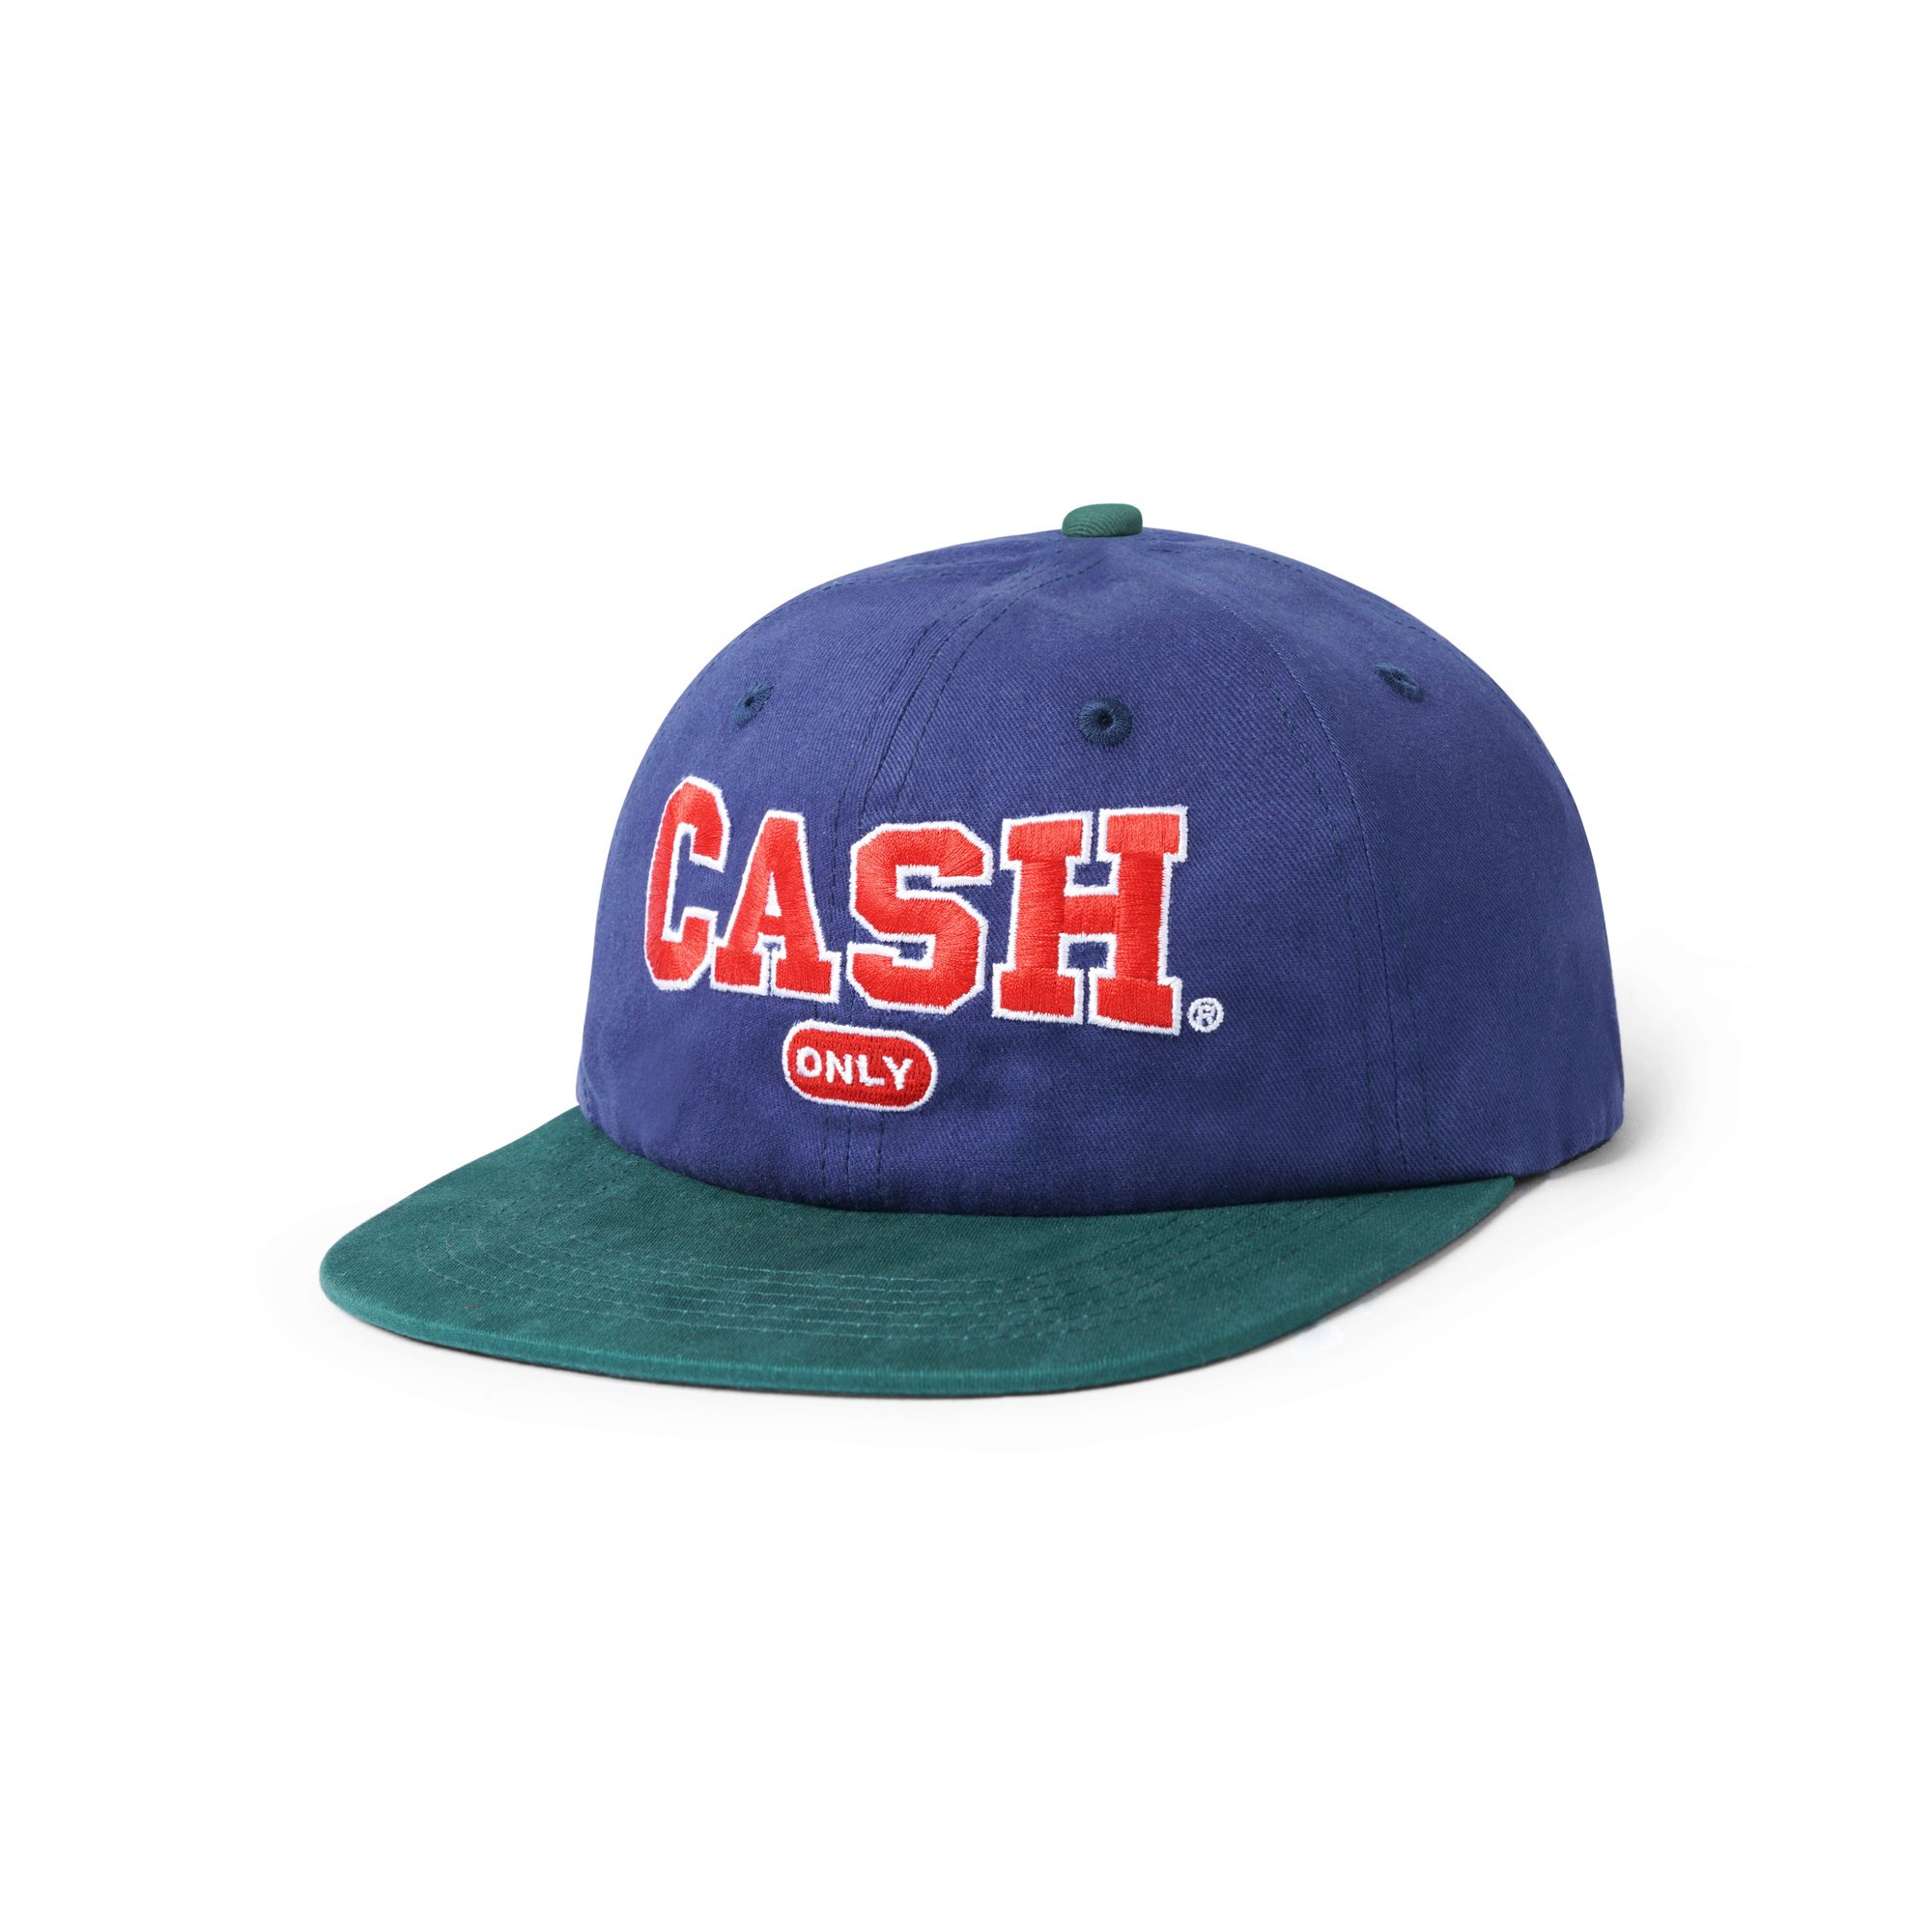 Cash Only<br>College 6 Panel Cap<br>